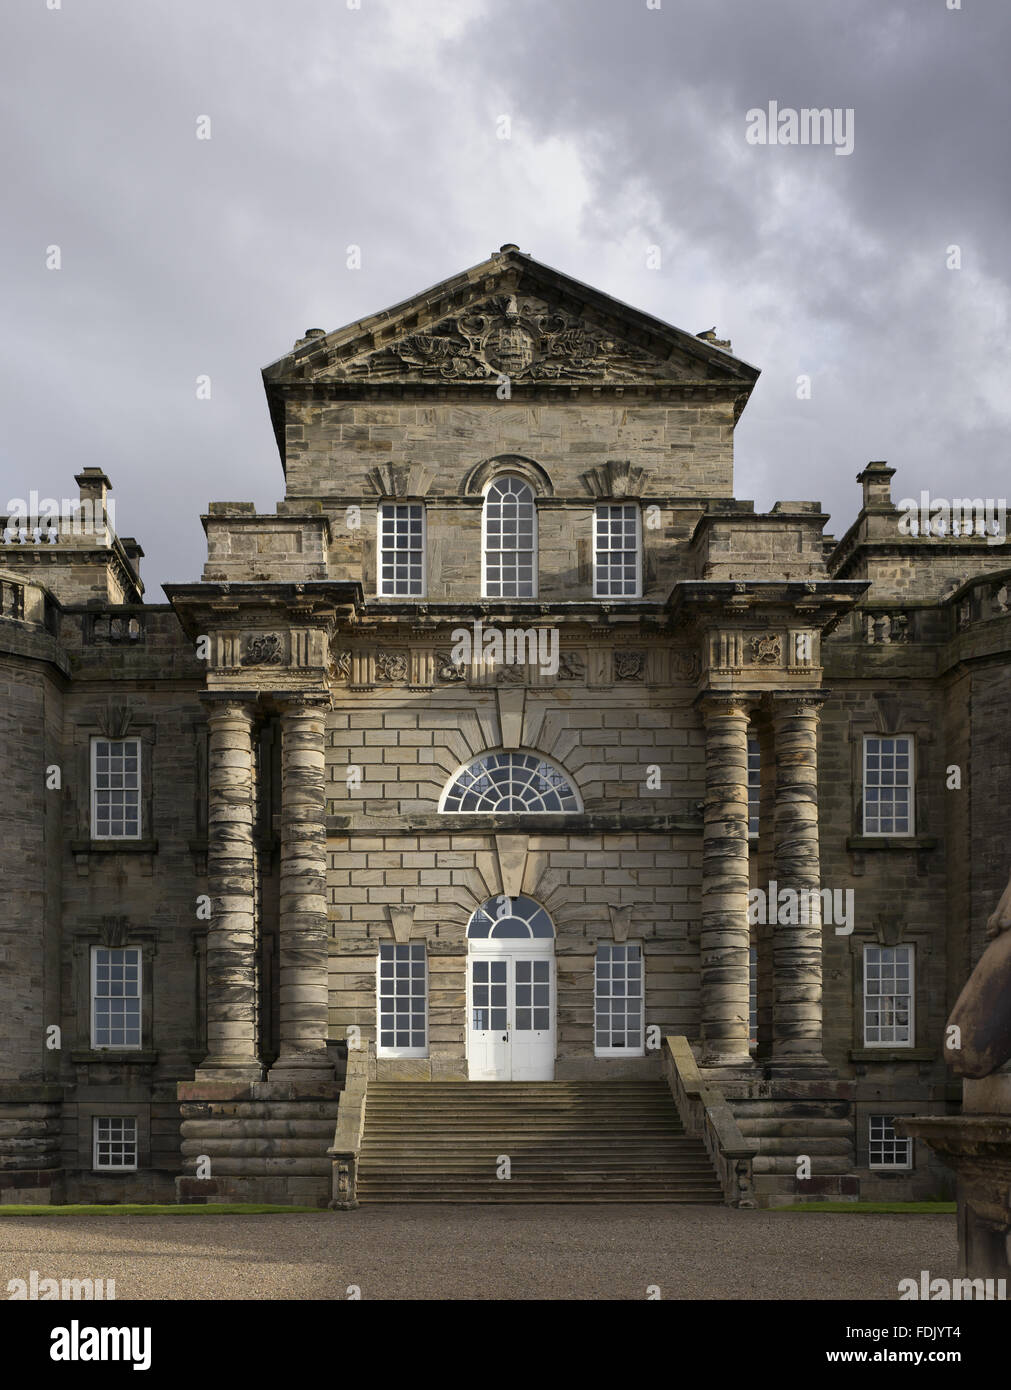 The central block, gutted by fire in 1822, at Seaton Delaval Hall, Northumberland. The house was built for Admiral George Delaval by Sir John Vanbrugh, between 1718 and 1728, in the English Baroque style. Stock Photo